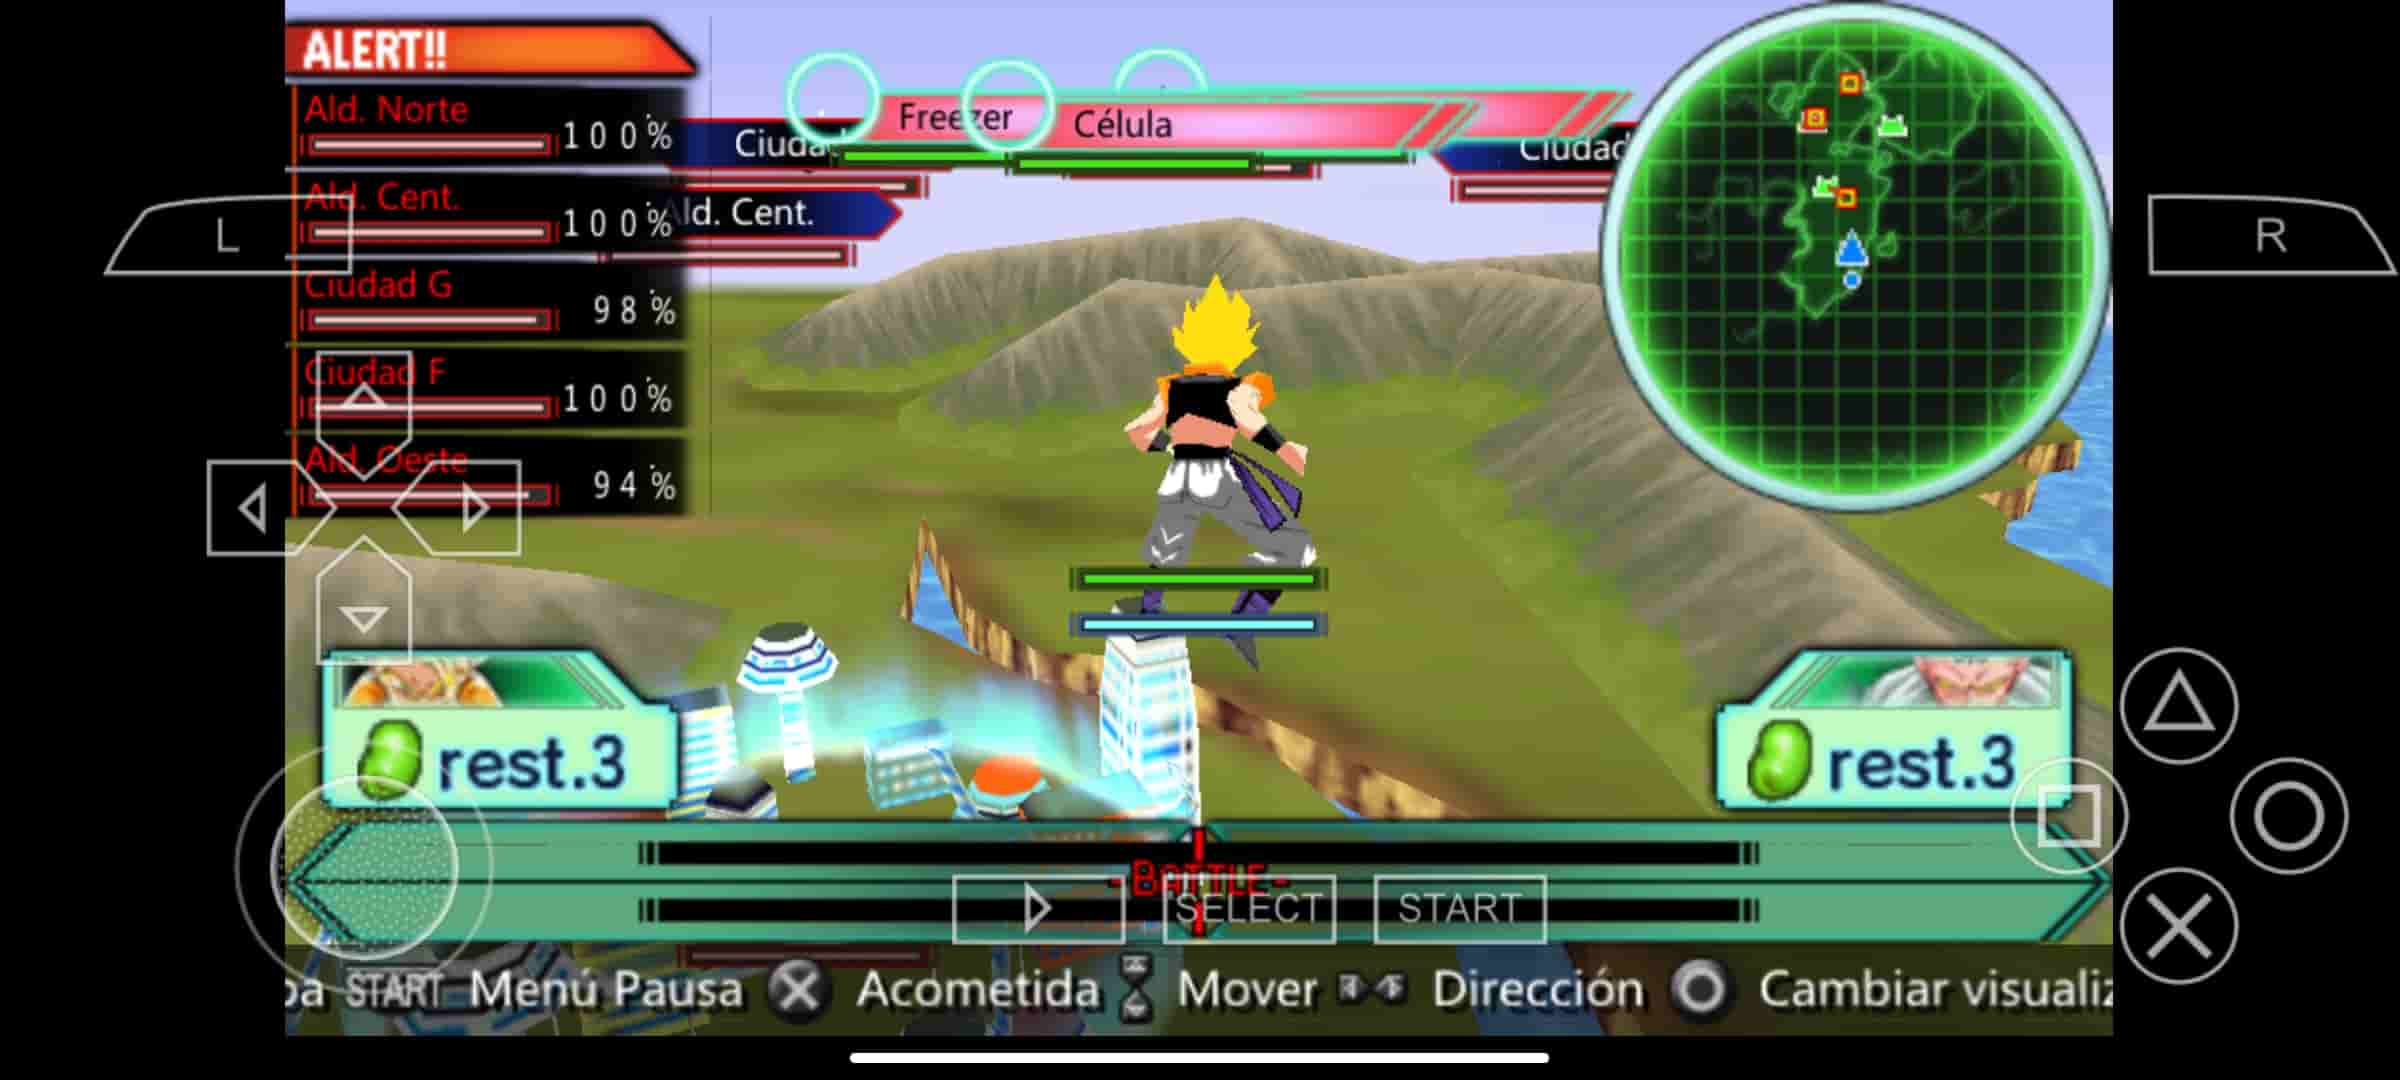 Dragon Ball Z Shin Budokai 6 PPSSPP Download (Highly Compressed)